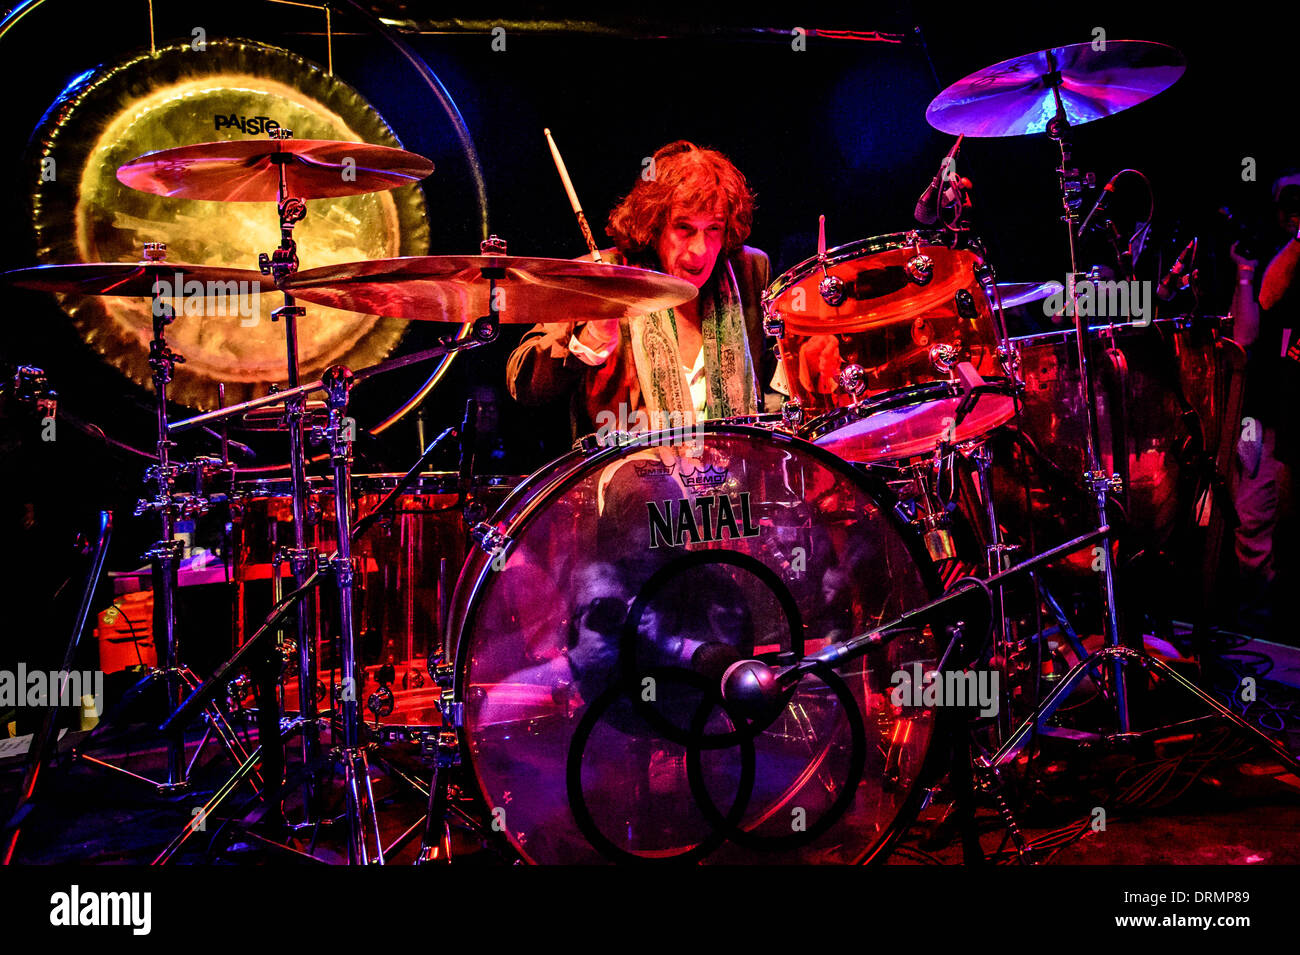 Toronto, Ontario, Canada. 24th Jan, 2014. CORKY LAING. The Bonzo Bash, it is the ultimate celebration for the ultimate drummer, John Henry Bonham of Led Zeppelin. It is presented by Natal and Marshall and is a night filled with amazing drummers playing their favorite Led Zeppelin song. It is a complete evening of Led Zeppelin jams and this year was a crazy one! It was be hosted by Mike Portnoy, Carmine Appice and the show creator, Brian Tichy at The Observatory club in Santa Ana, CA. © Igor Vidyashev/ZUMAPRESS.com/Alamy Live News Stock Photo